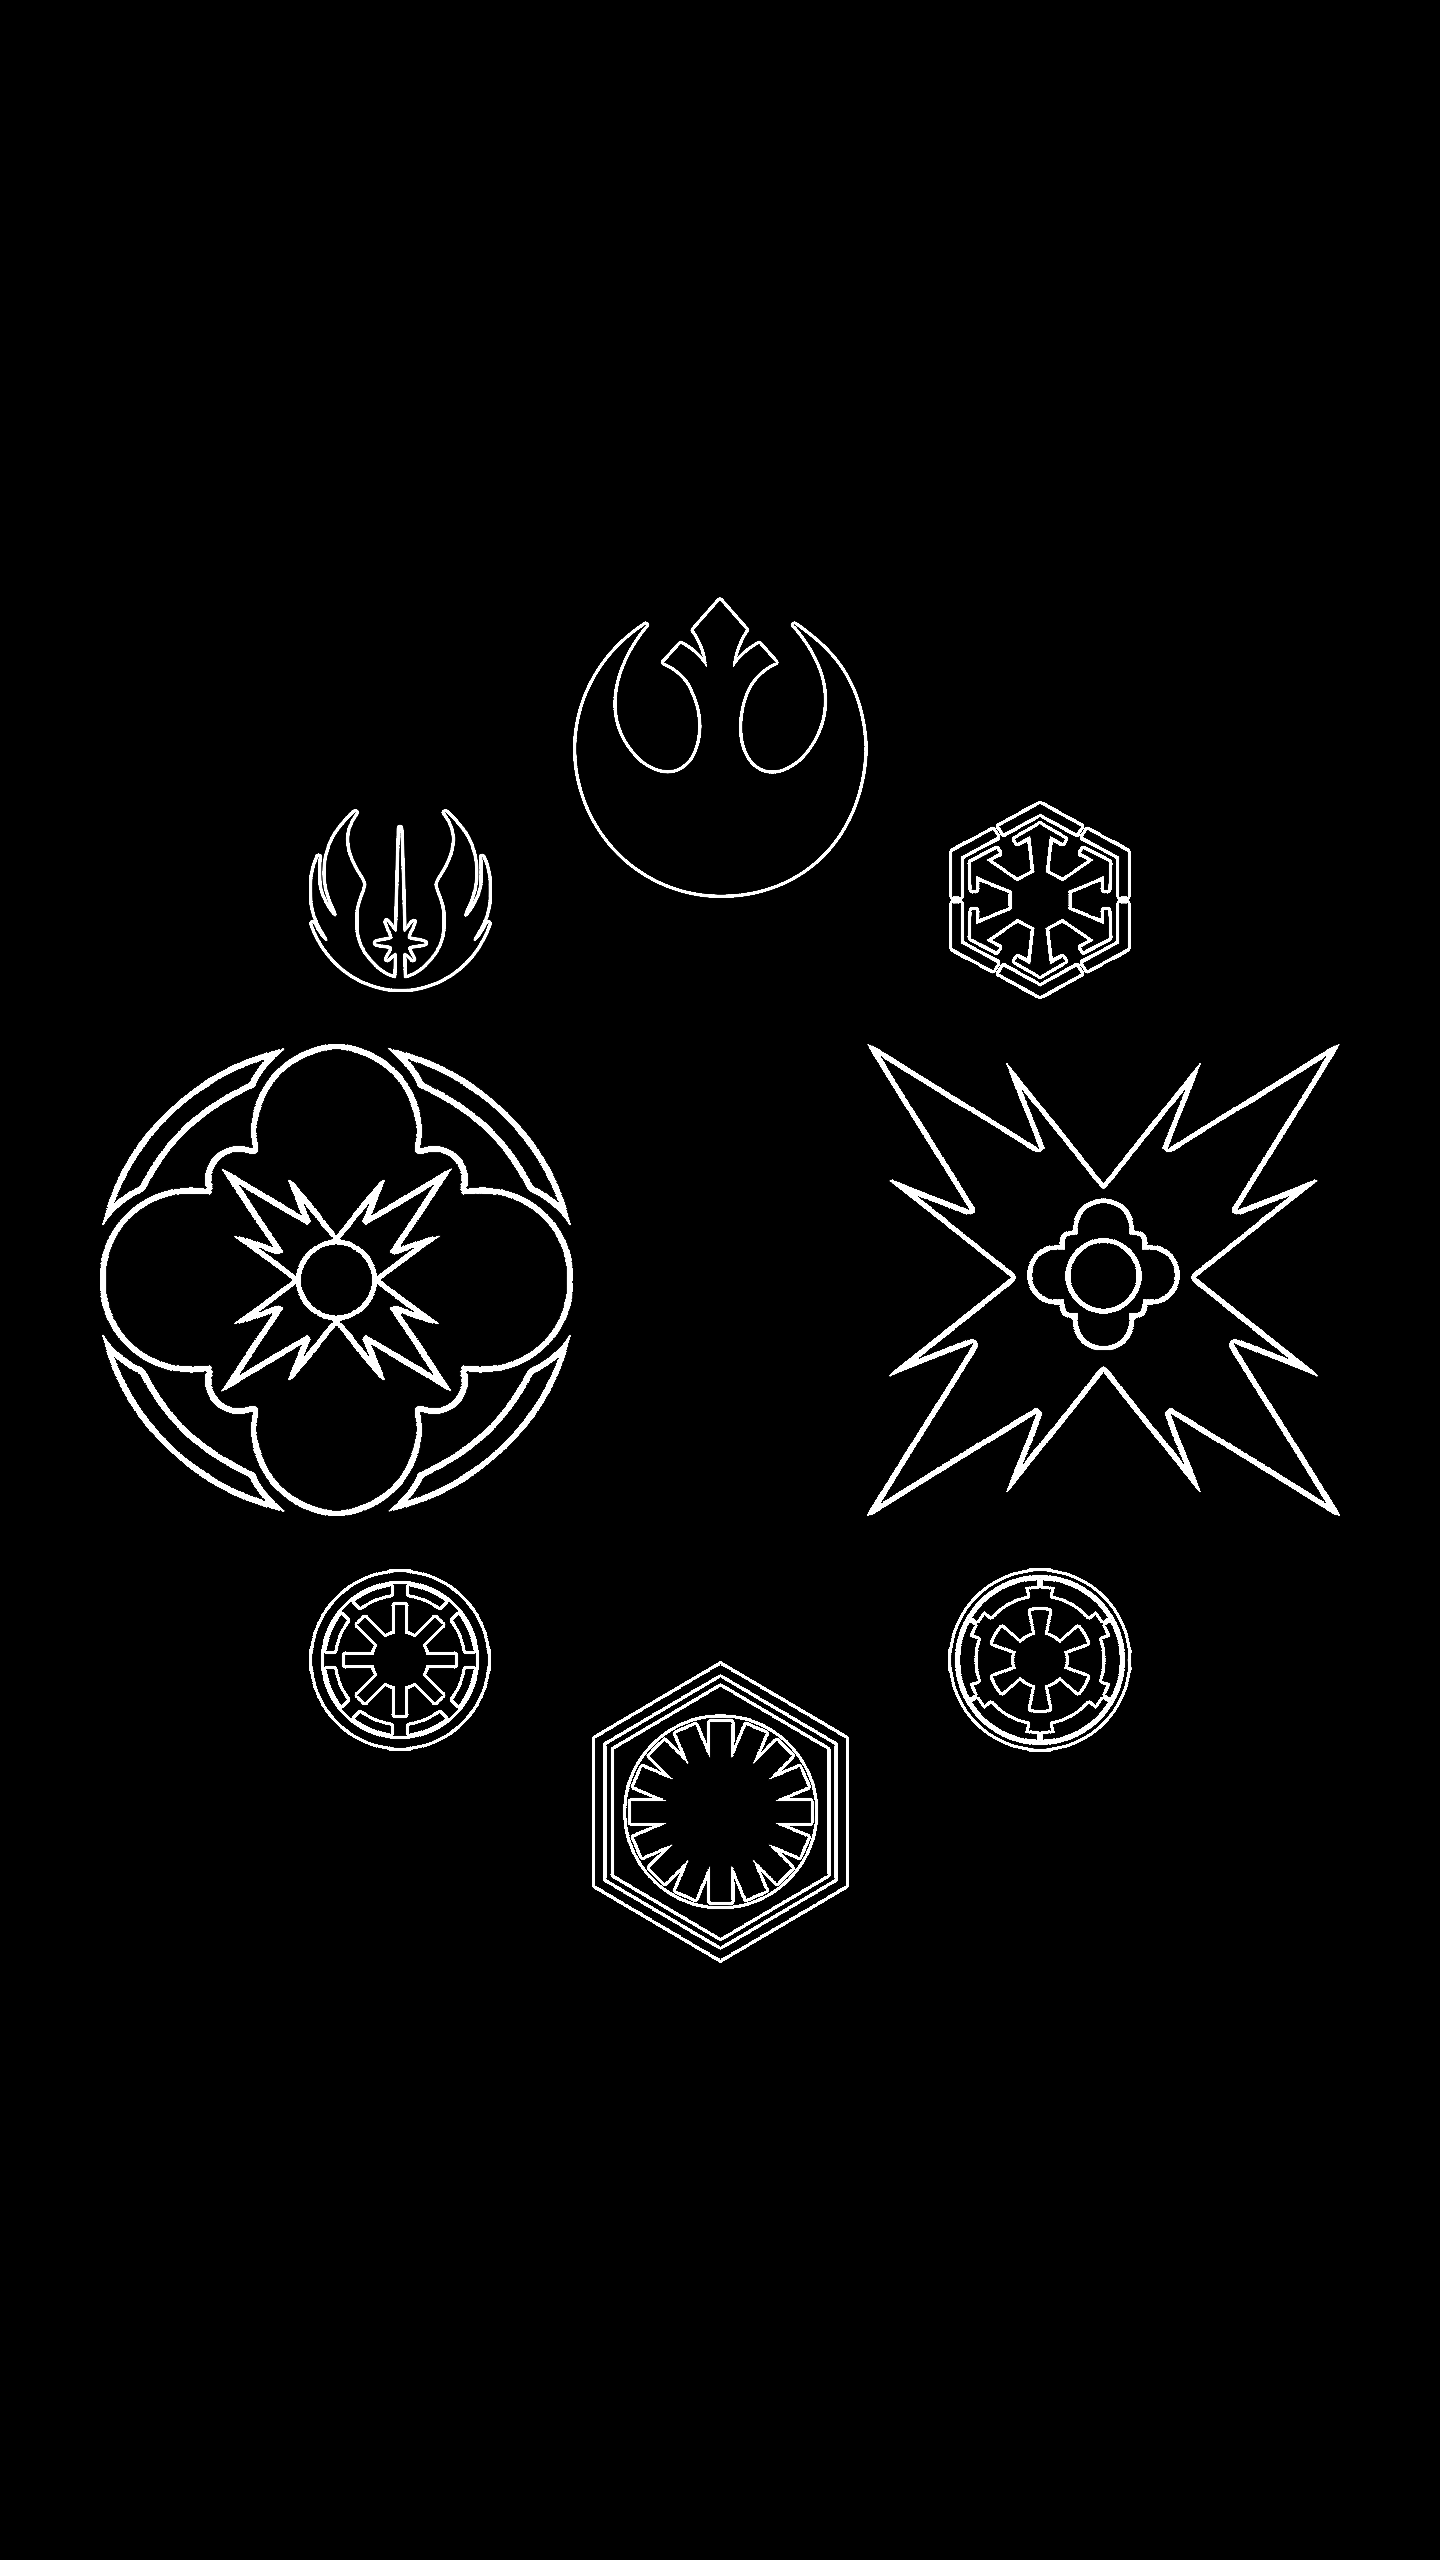 Made an amoled wallpaper based on the symbols of star wars!